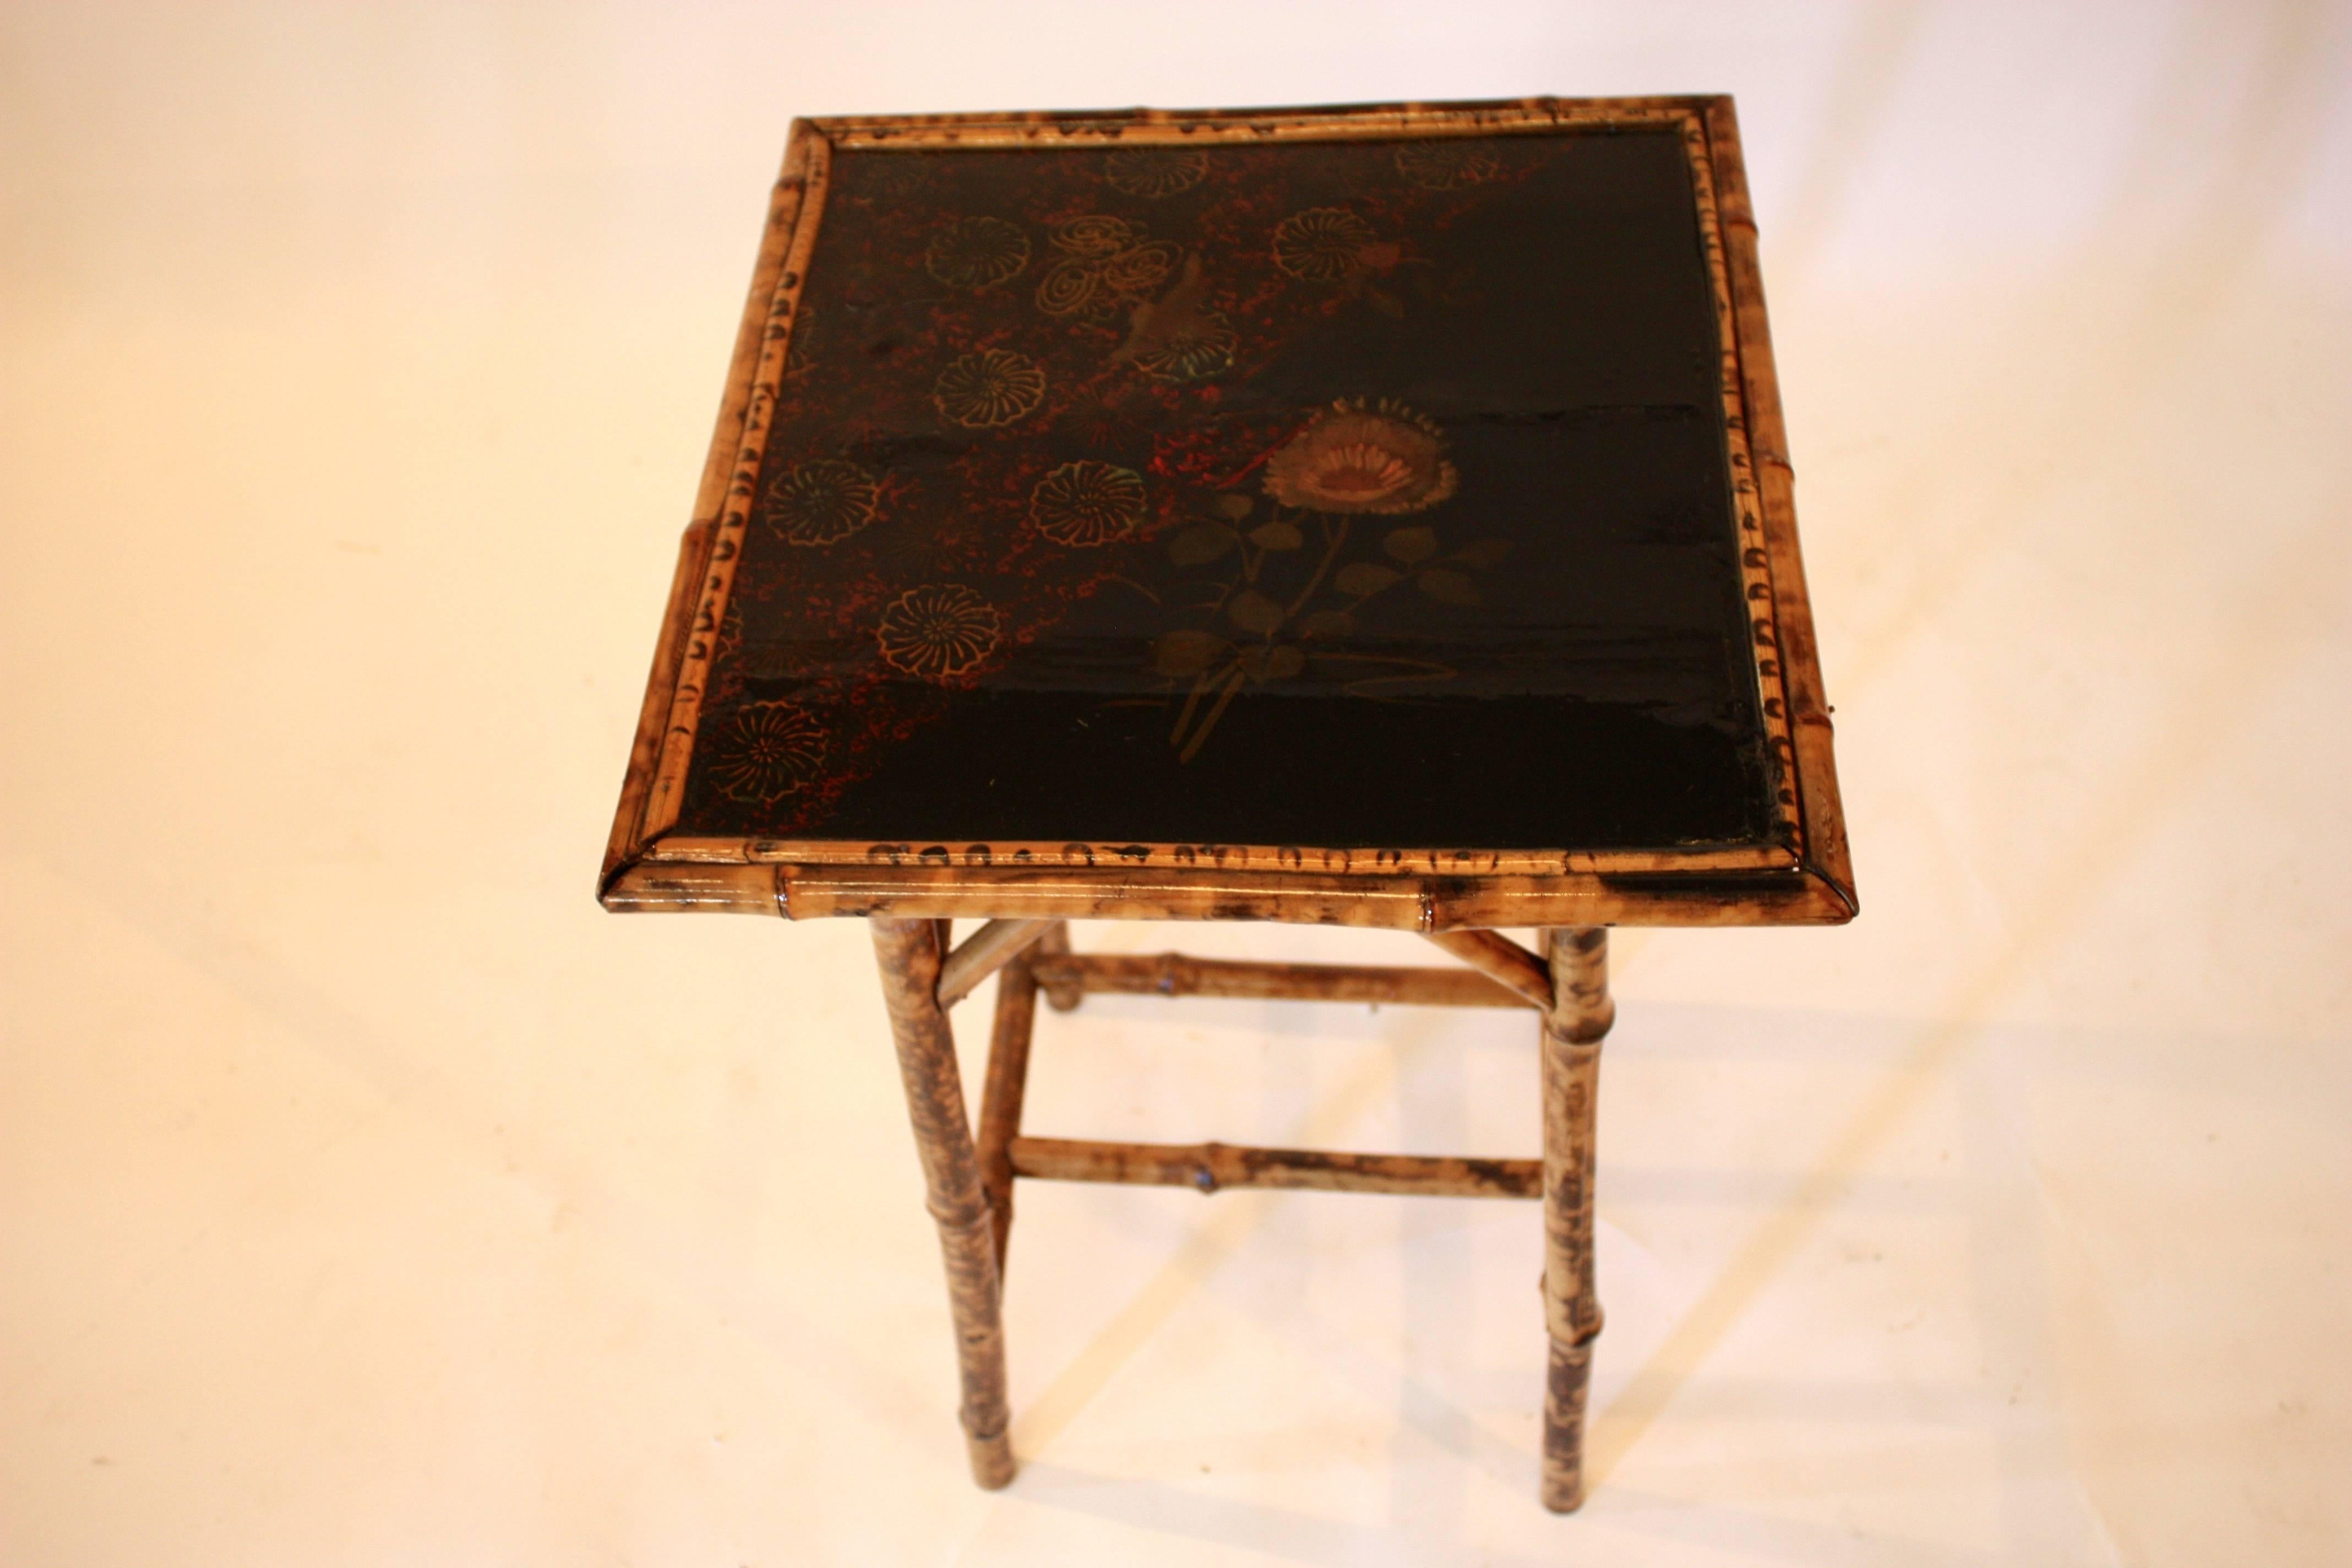 Hand-painted top, lightweight side table.